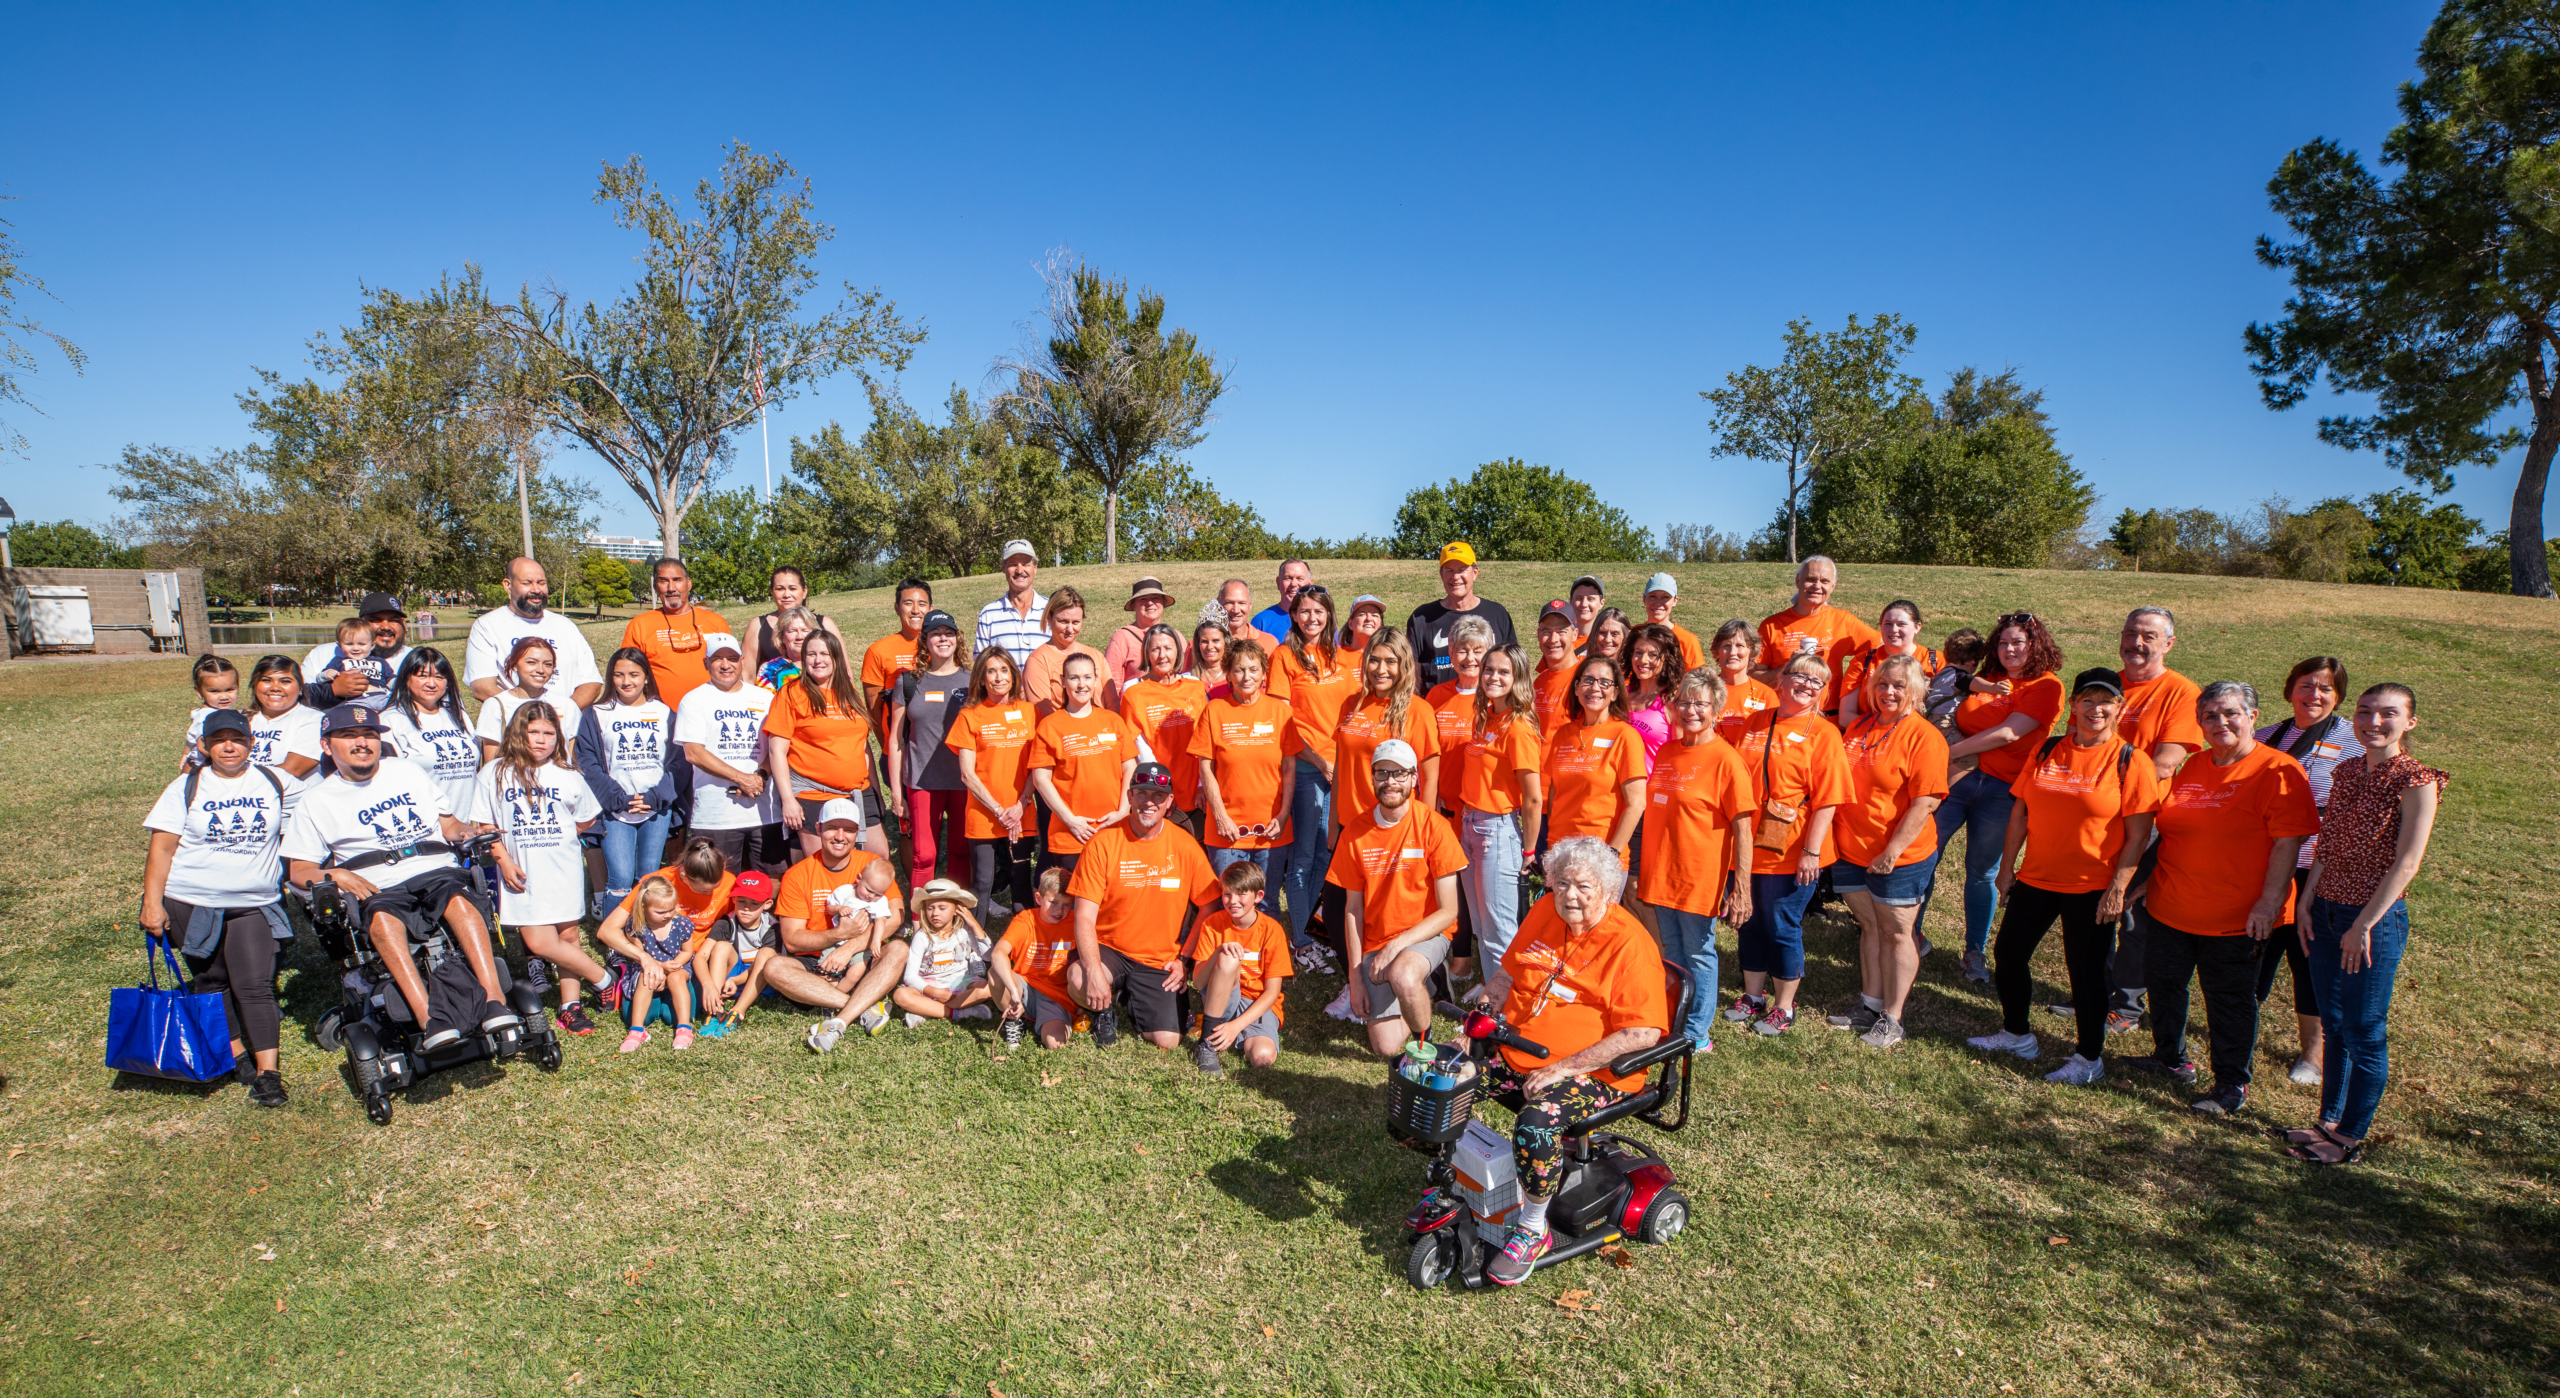 Group photo from Arizona Walk-Run-N-Roll. Group of people in bright orange shirts on grass with a clear blue sky above.